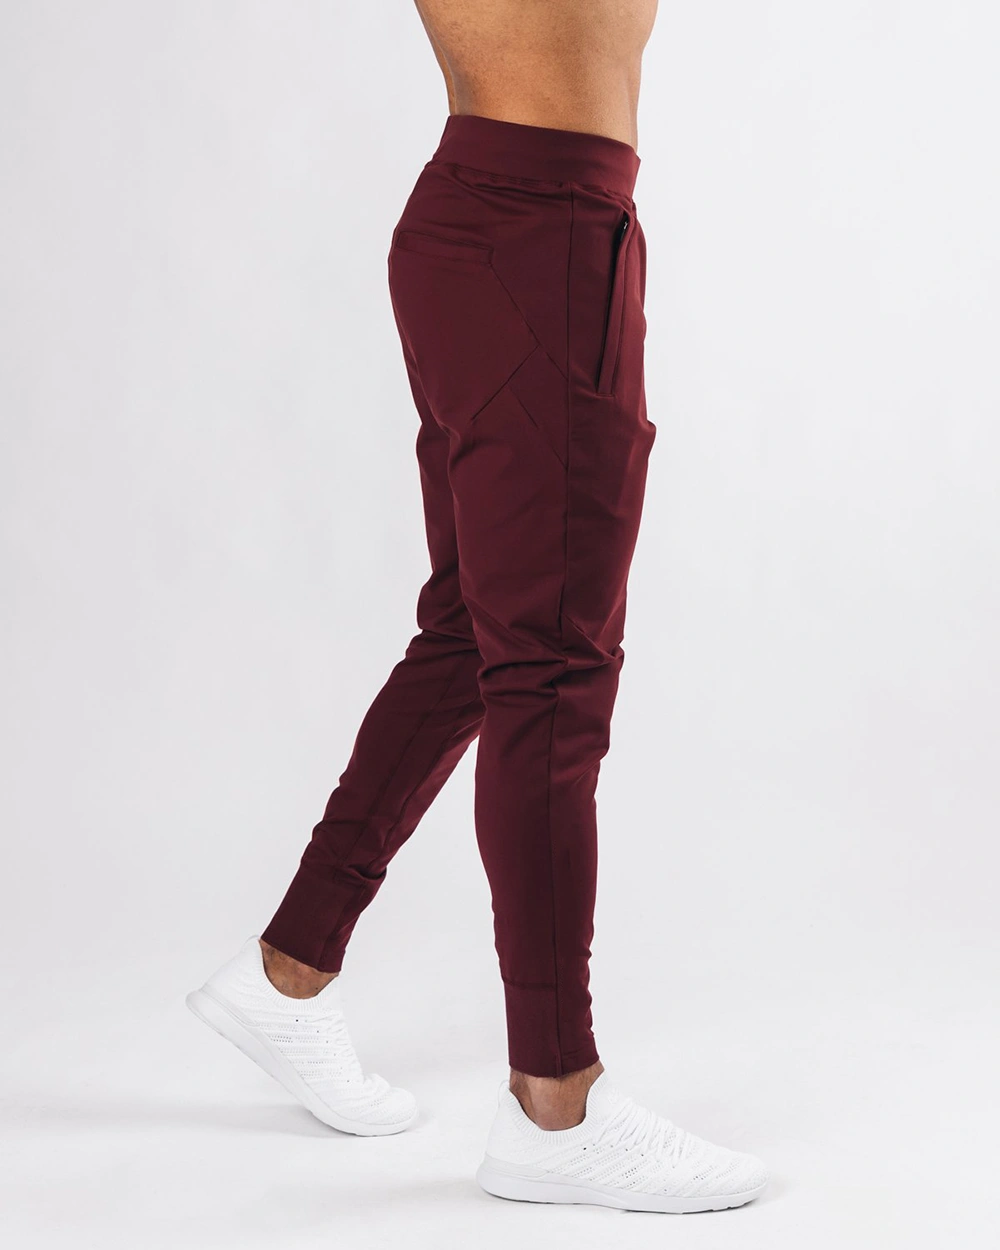 Men's 4-Way Stretchtapered Fit Jogger